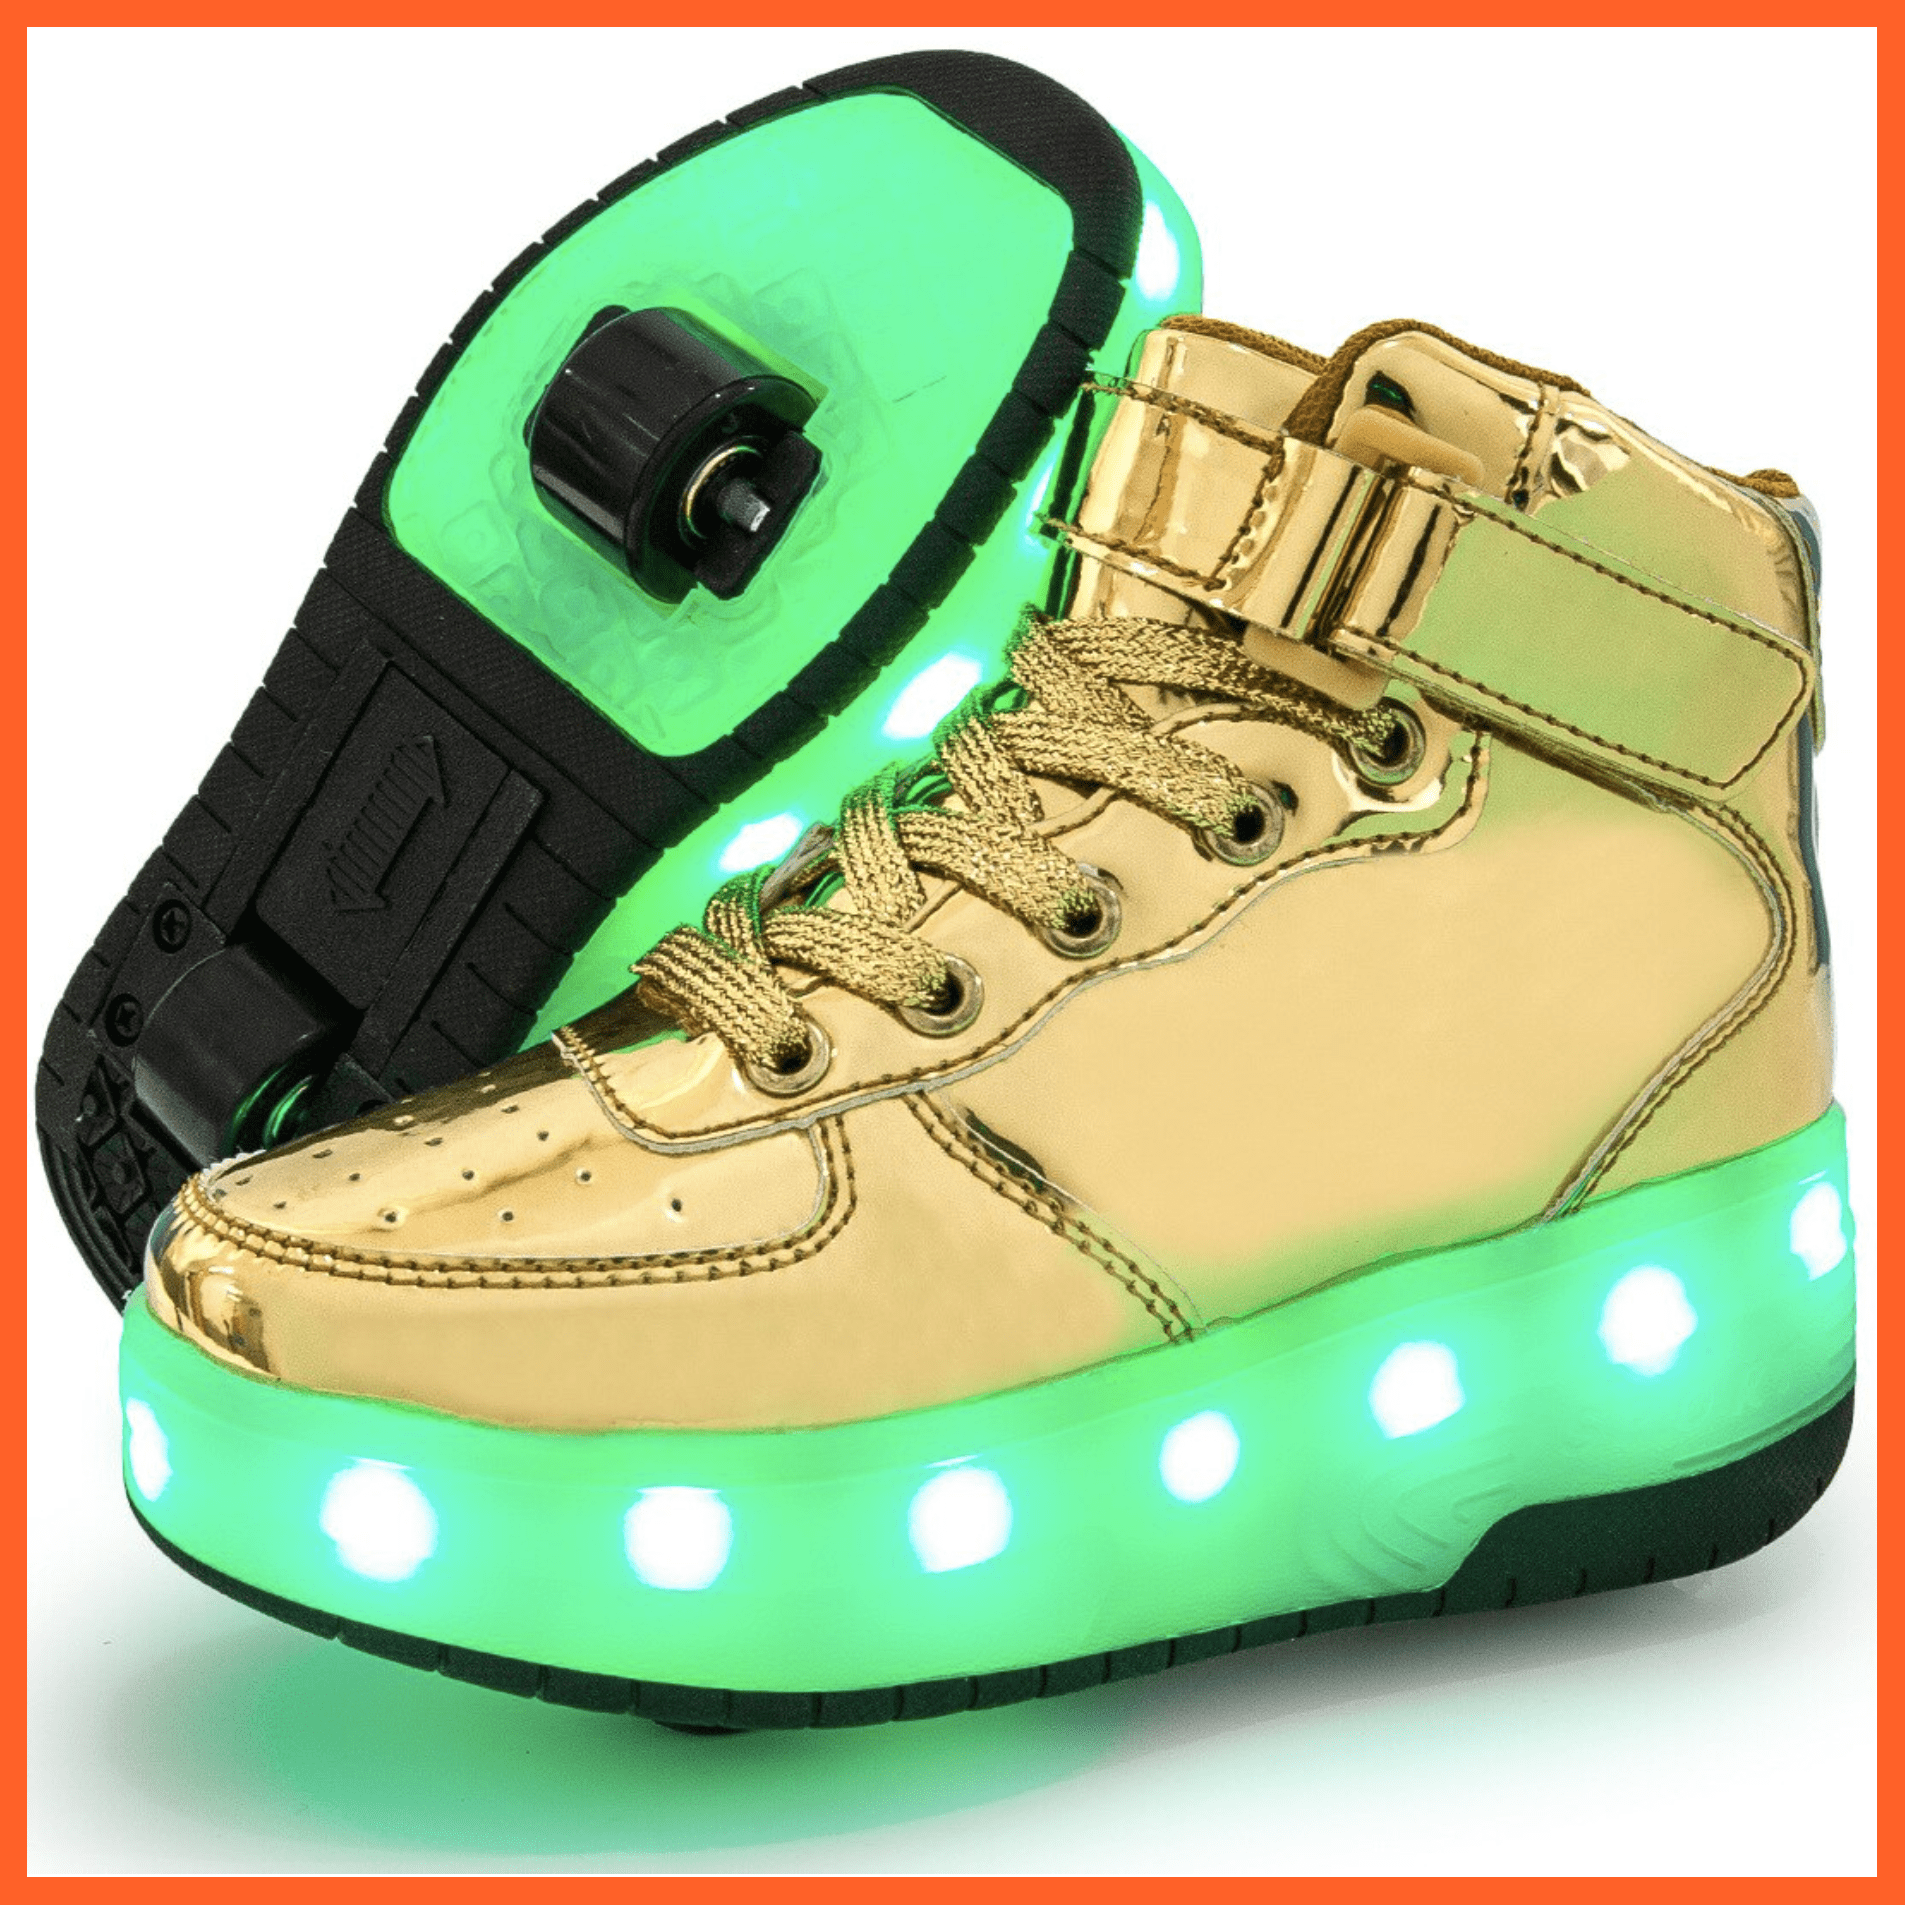 High Top Gold Sytlish Led Roller Shoes | Roller High Top Light Up Sneakers For Kids | whatagift.com.au.